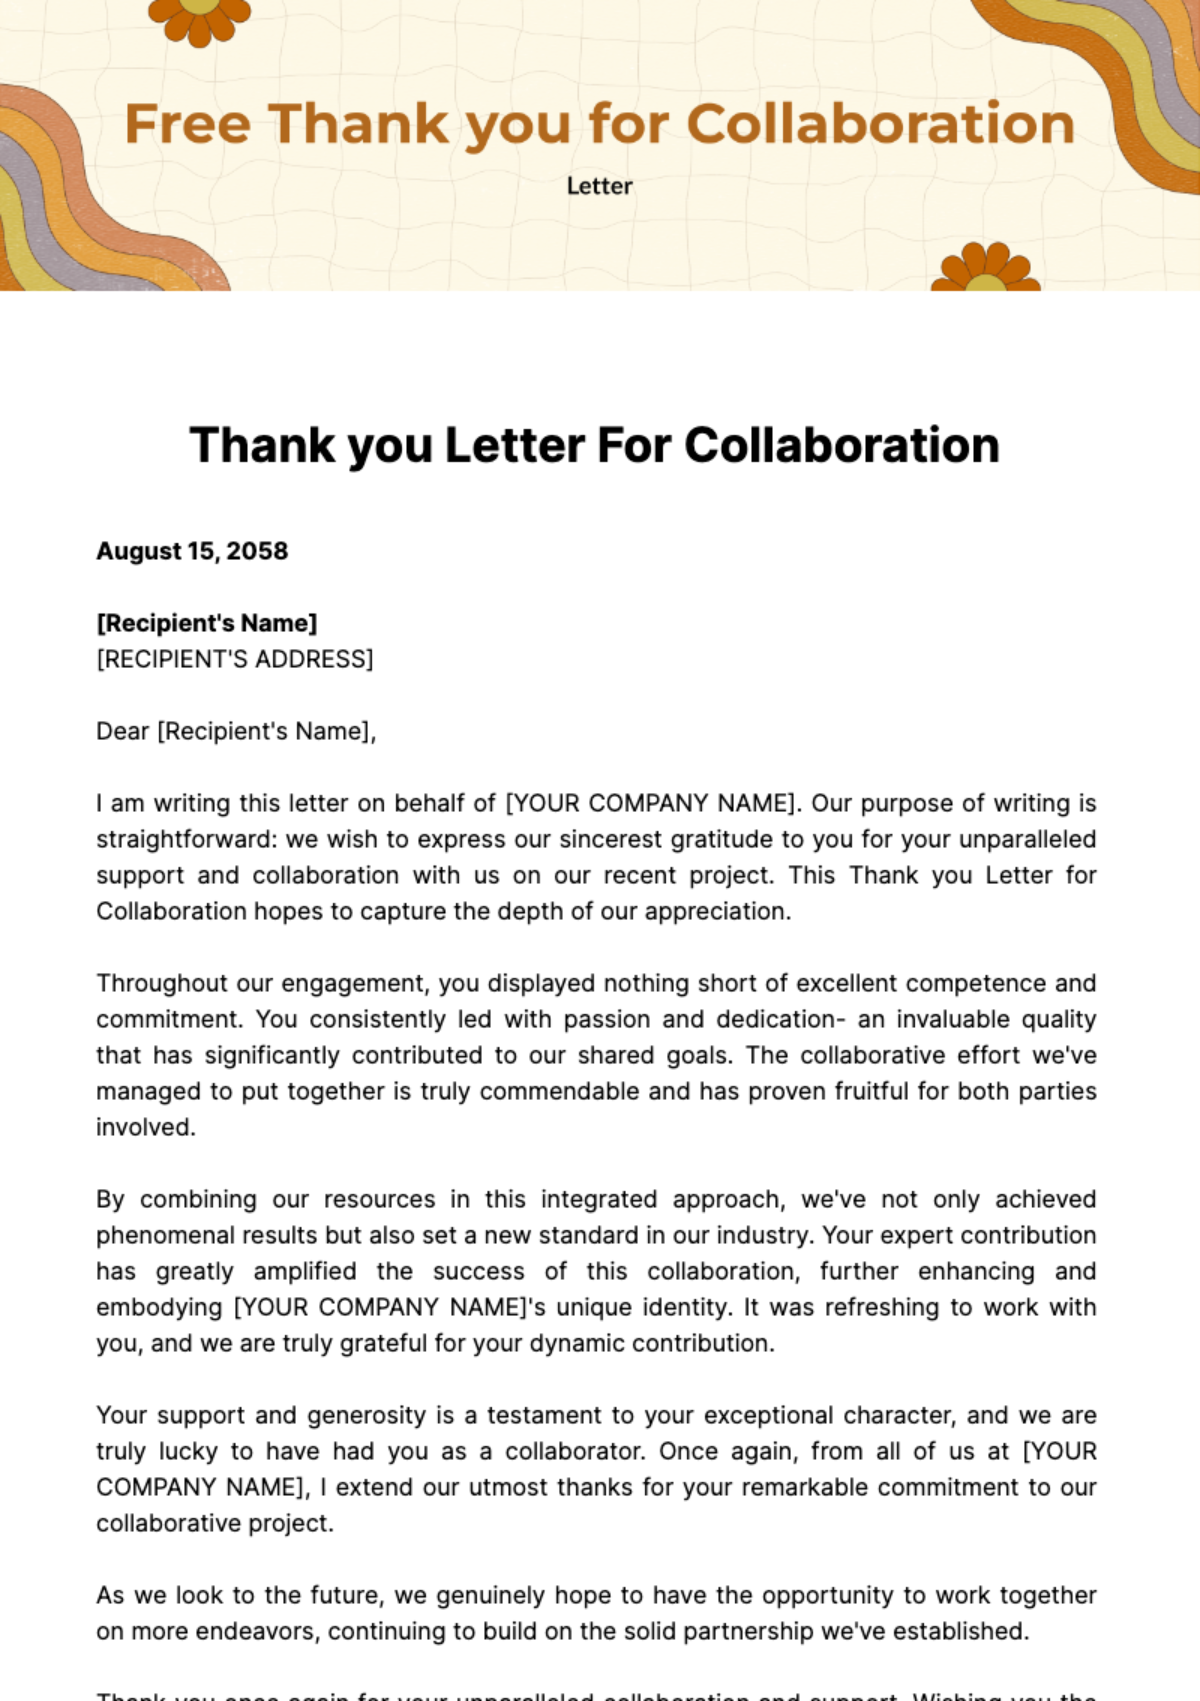 Thank you Letter for Collaboration Template